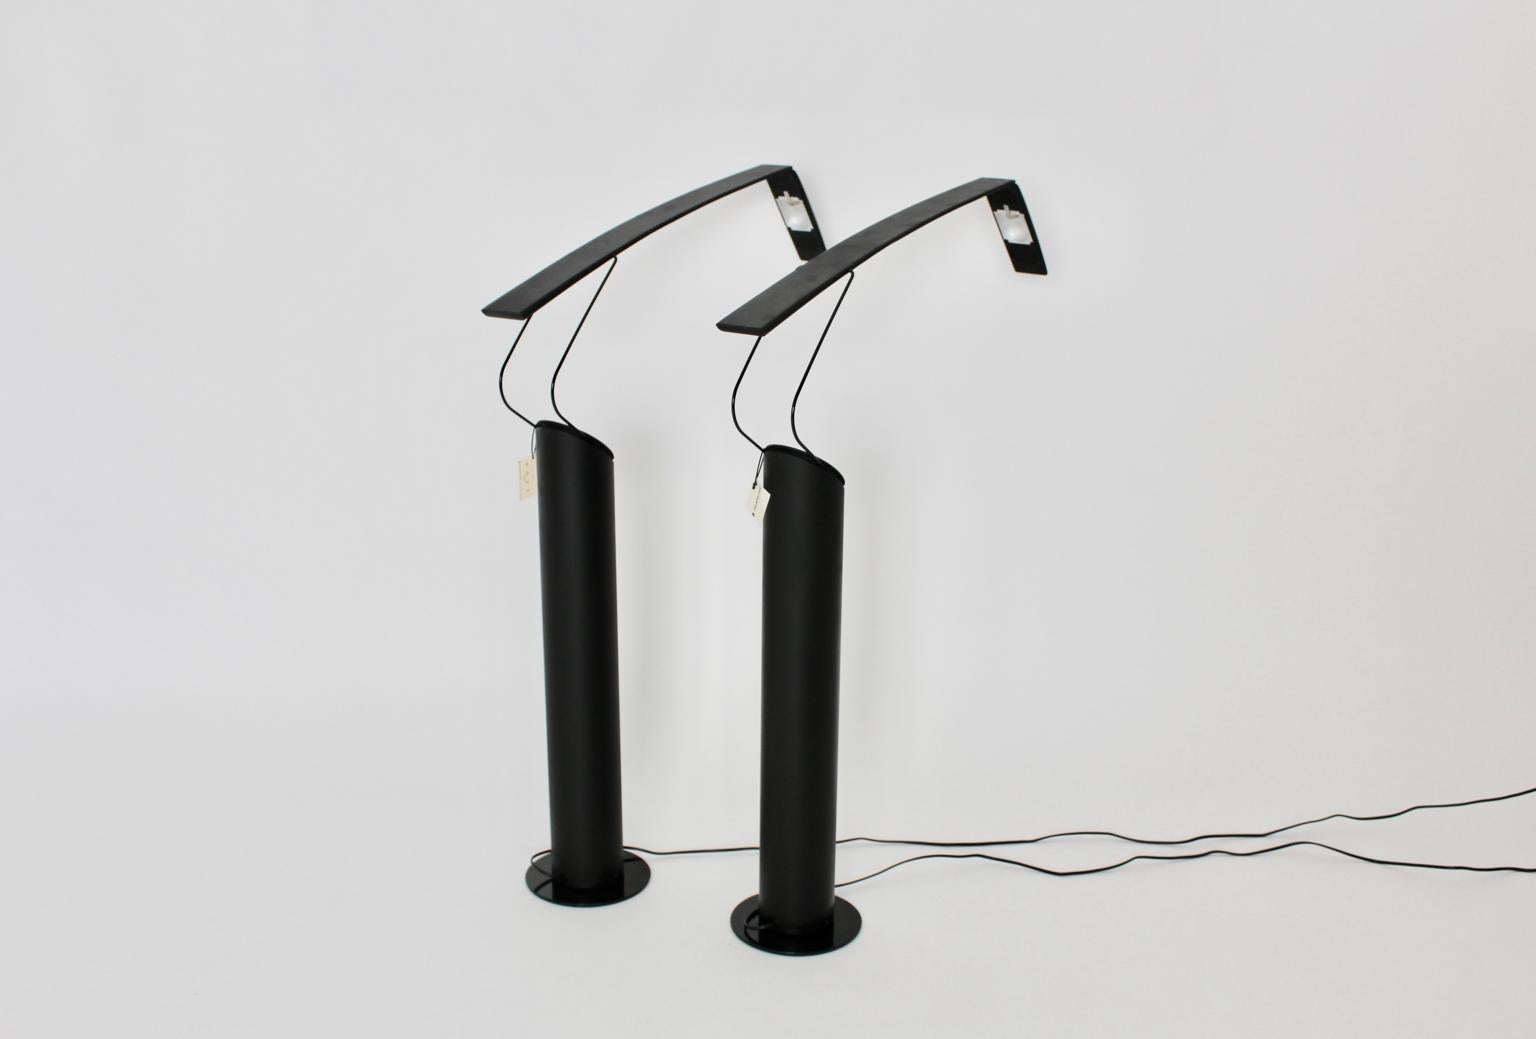 Black metal vintage set of two halogen floor lamps named Dove, which was designed by Mario Barbaglia and Marco Colombo, Italy 1980s and executed by Italian Luce.
The black table lamps rotate on the base (approximate 19 cm diameter) and the arms with